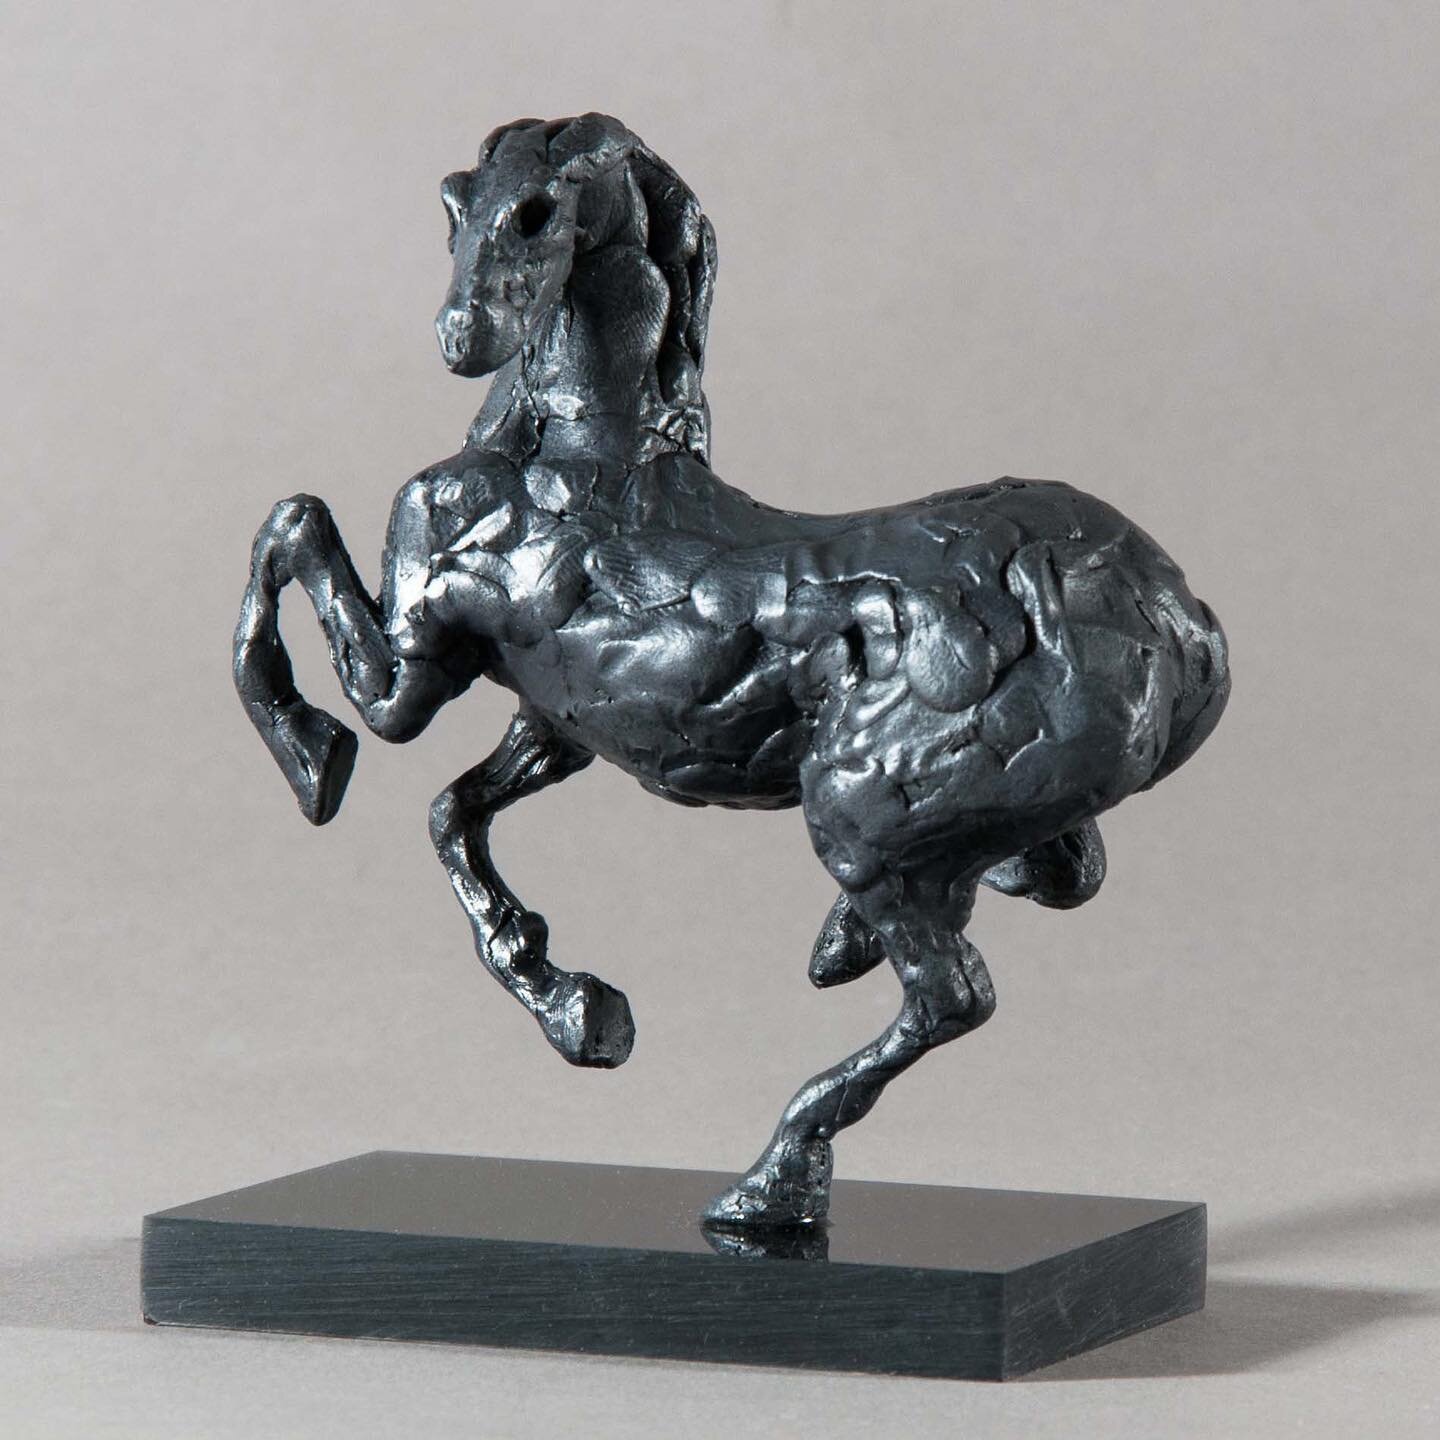 This is a little horse that I originally cast in bronze. Given the popularity of my resin editions I have now also cast a resin version, as it is here, which I can offer at a much lower price. Click through to my website for more details. 

#bathbusi